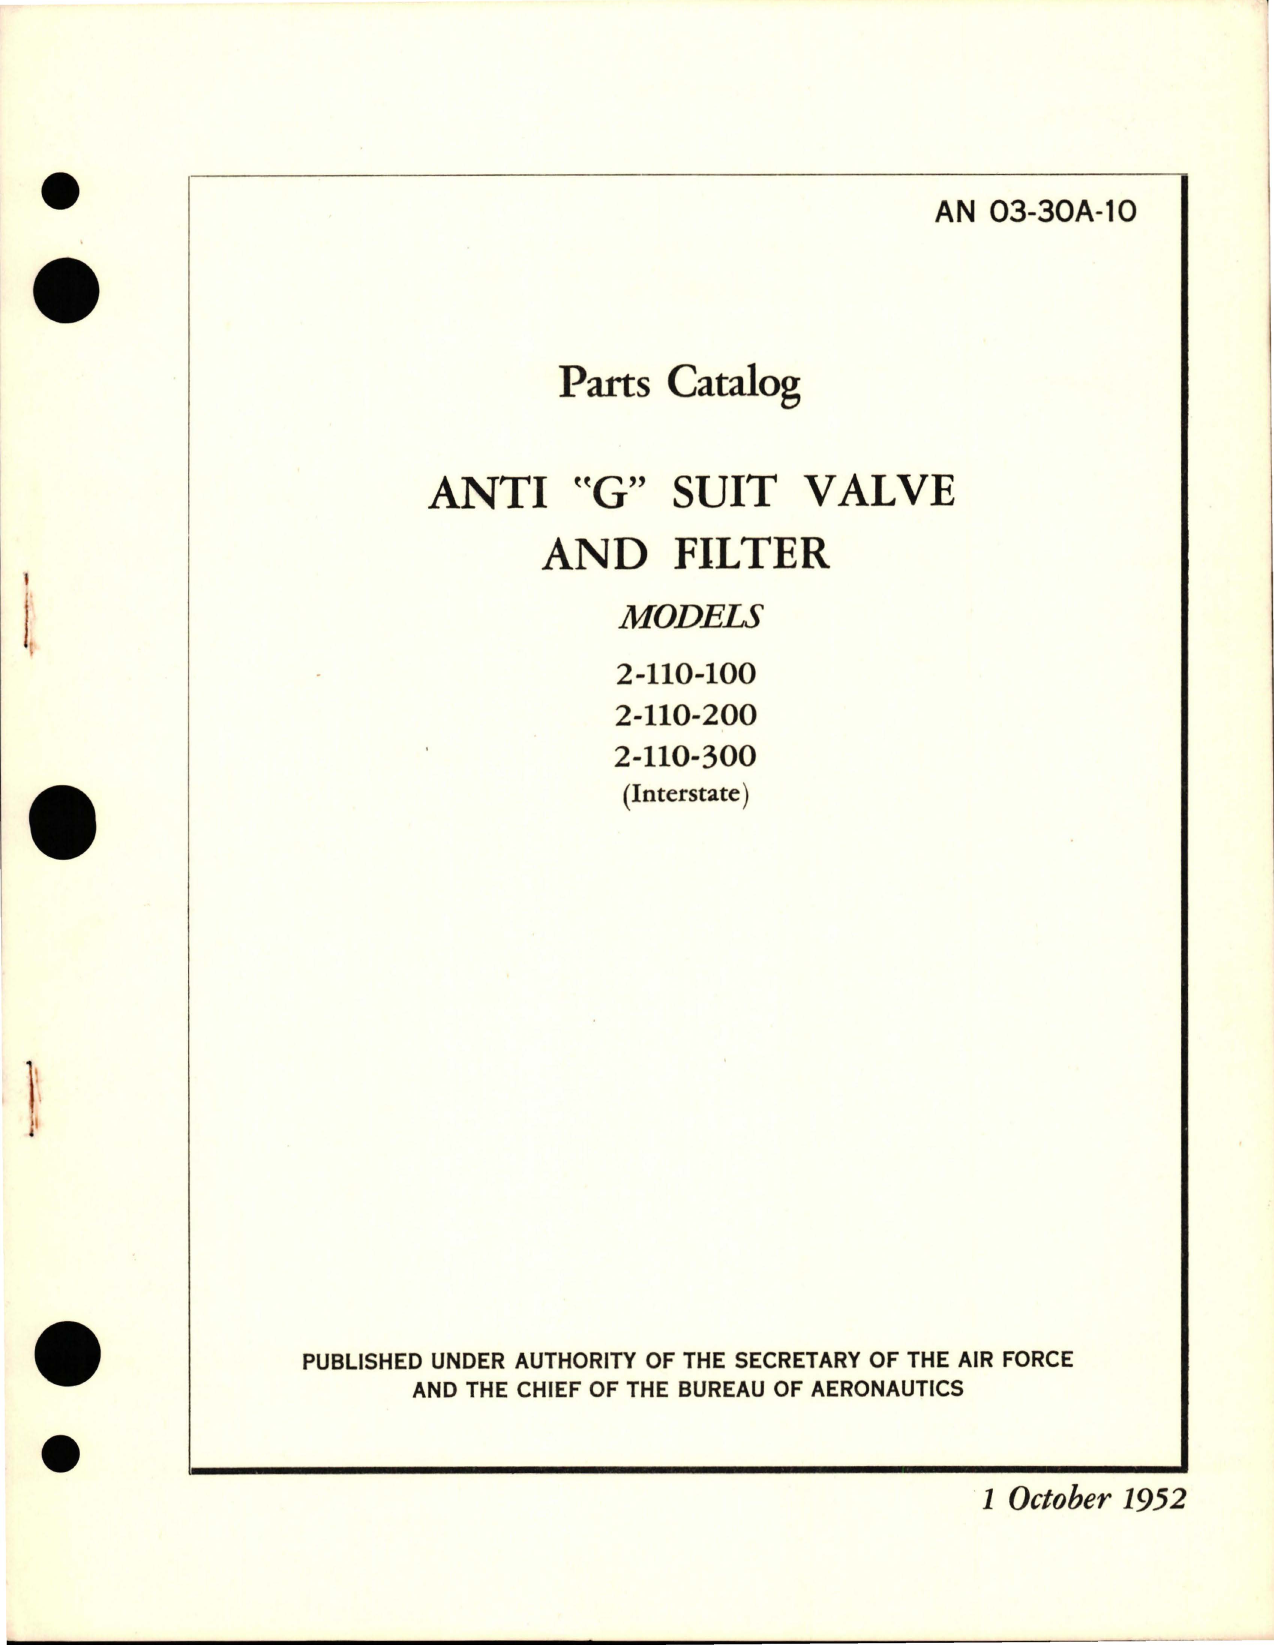 Sample page 1 from AirCorps Library document: Parts Catalog for Anti G Suit Valve and Filter - Models 2-110-100, 2-110-200, and 2-110-300